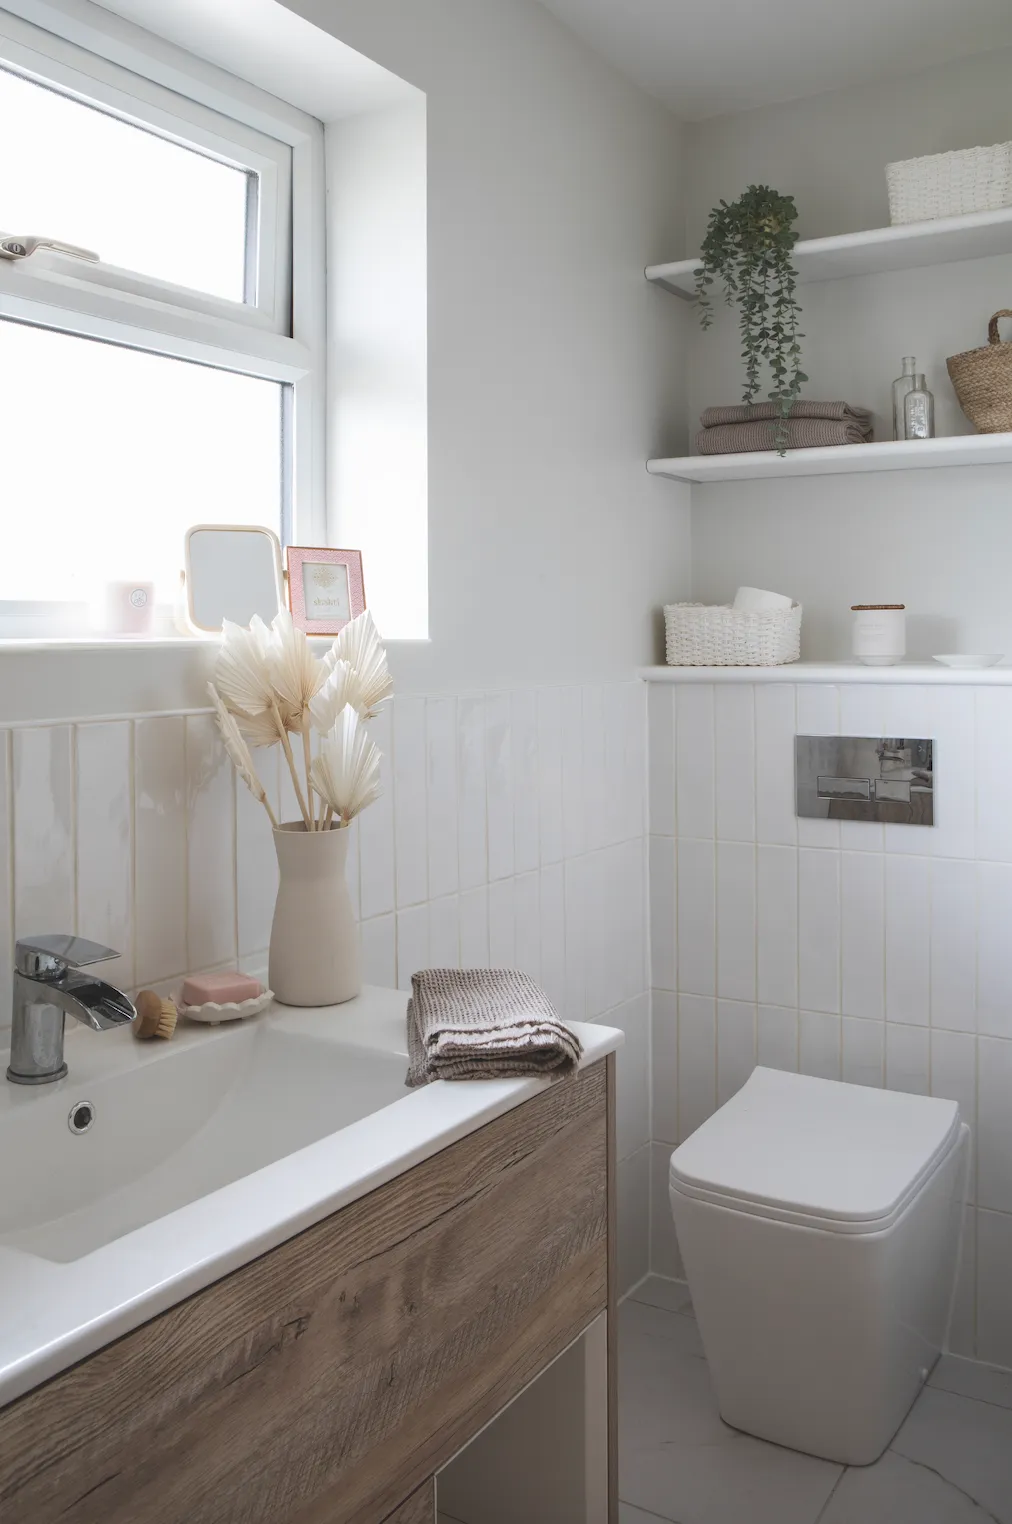 As the rest of her bathroom scheme is white and marble, Becca added warmth with natural tones. ‘I wanted a textured vanity in a colour contrast with the white tiles and fell in love with this wood-effect style for its Scandi look,’ says Becca